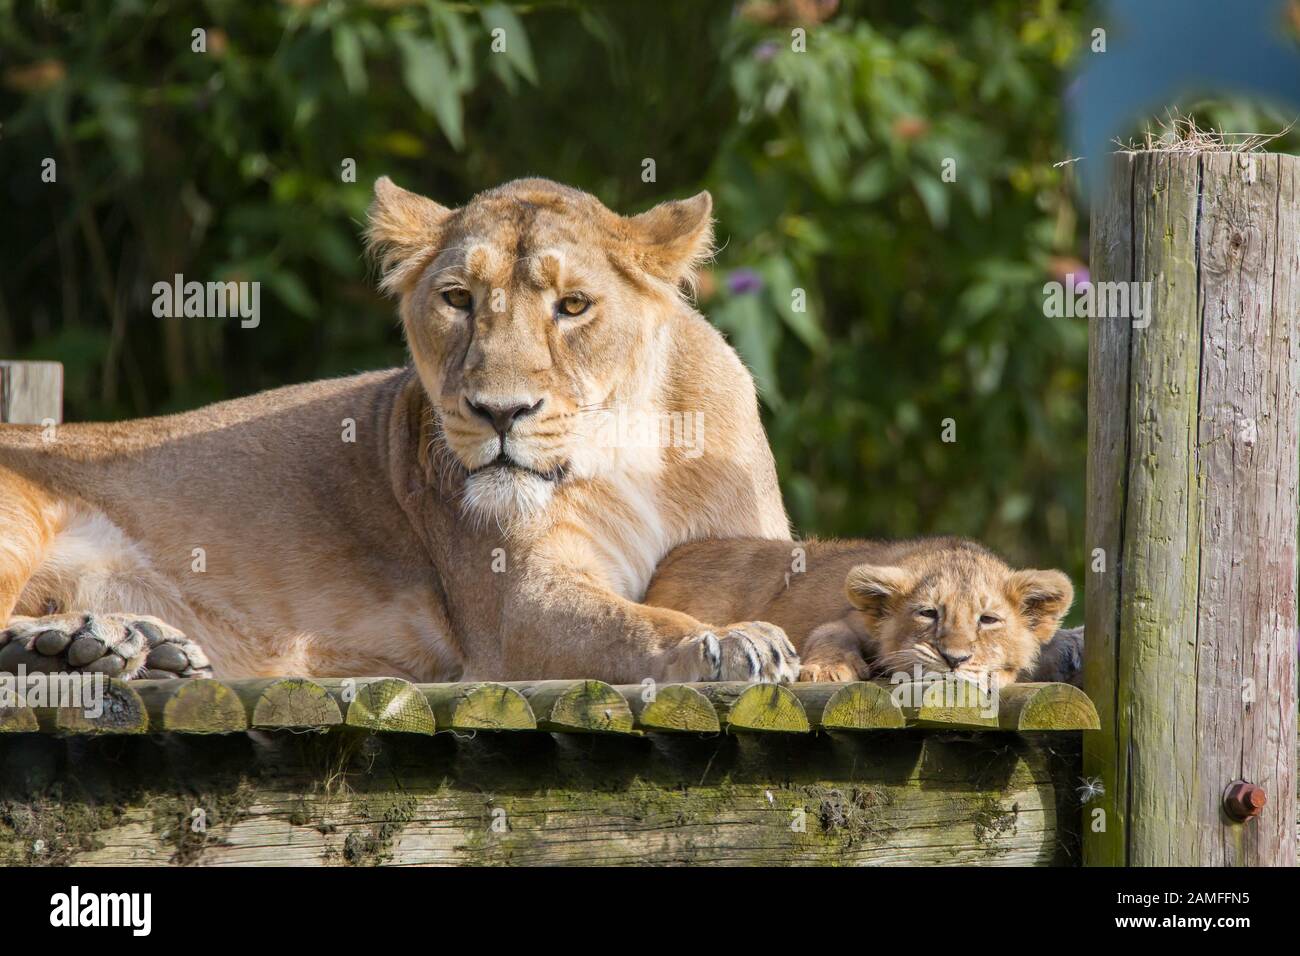 Close up of Asiatic lioness (Panthera leo persicus) lying with cute lion cub outdoors in summer sunshine, in enclosure at Cotswold Wildlife Park, UK. Stock Photo